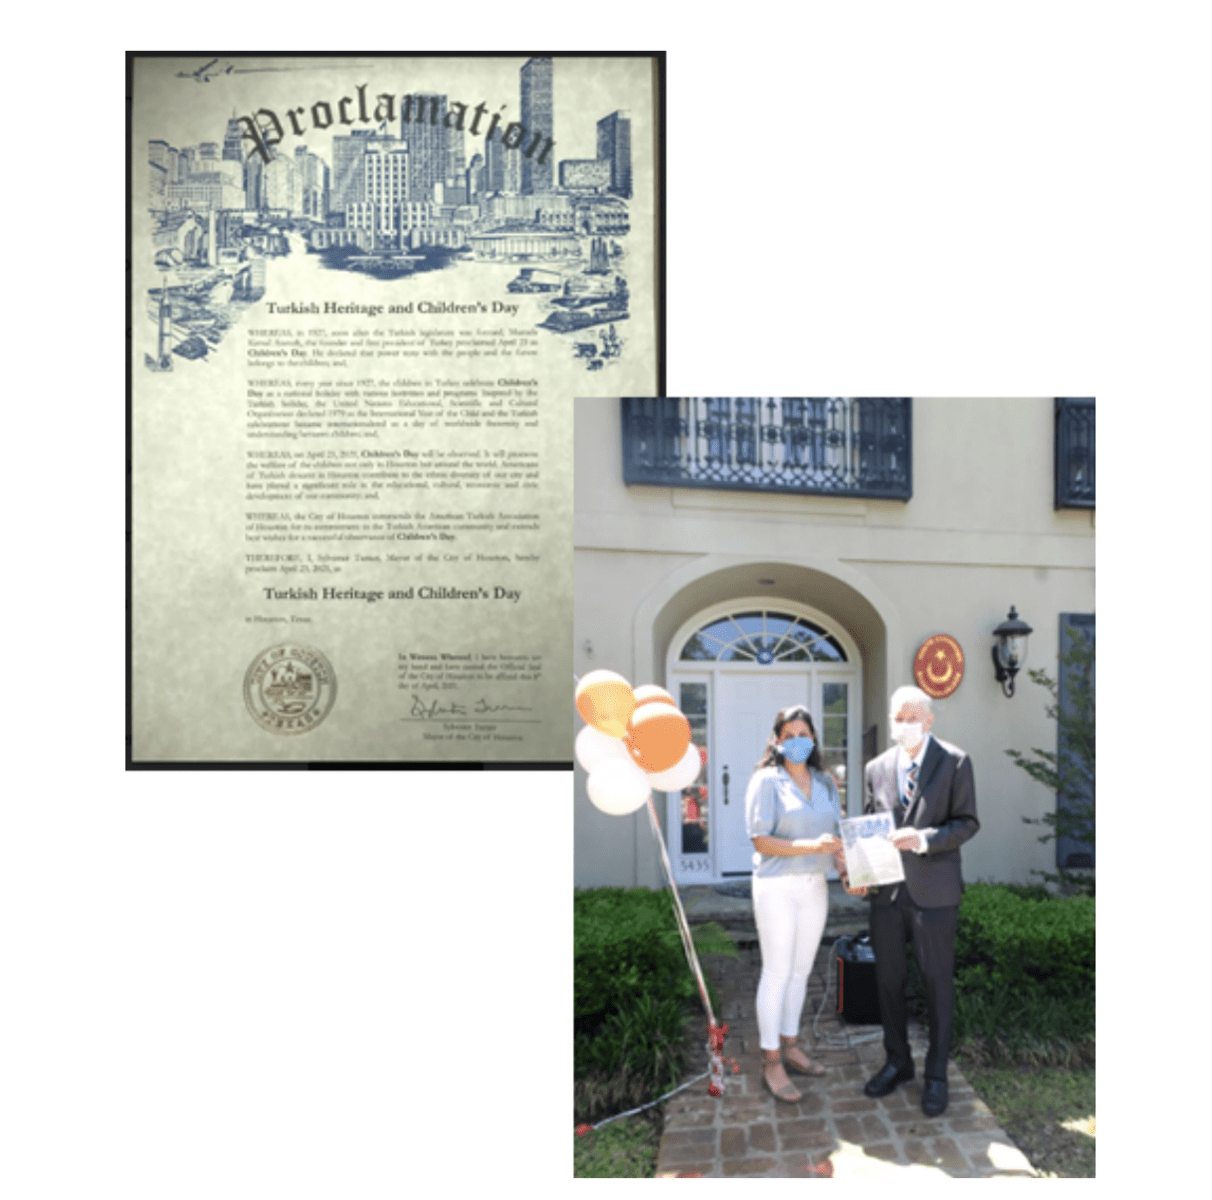 Proclamation from Mayor of Houston for Children's Day